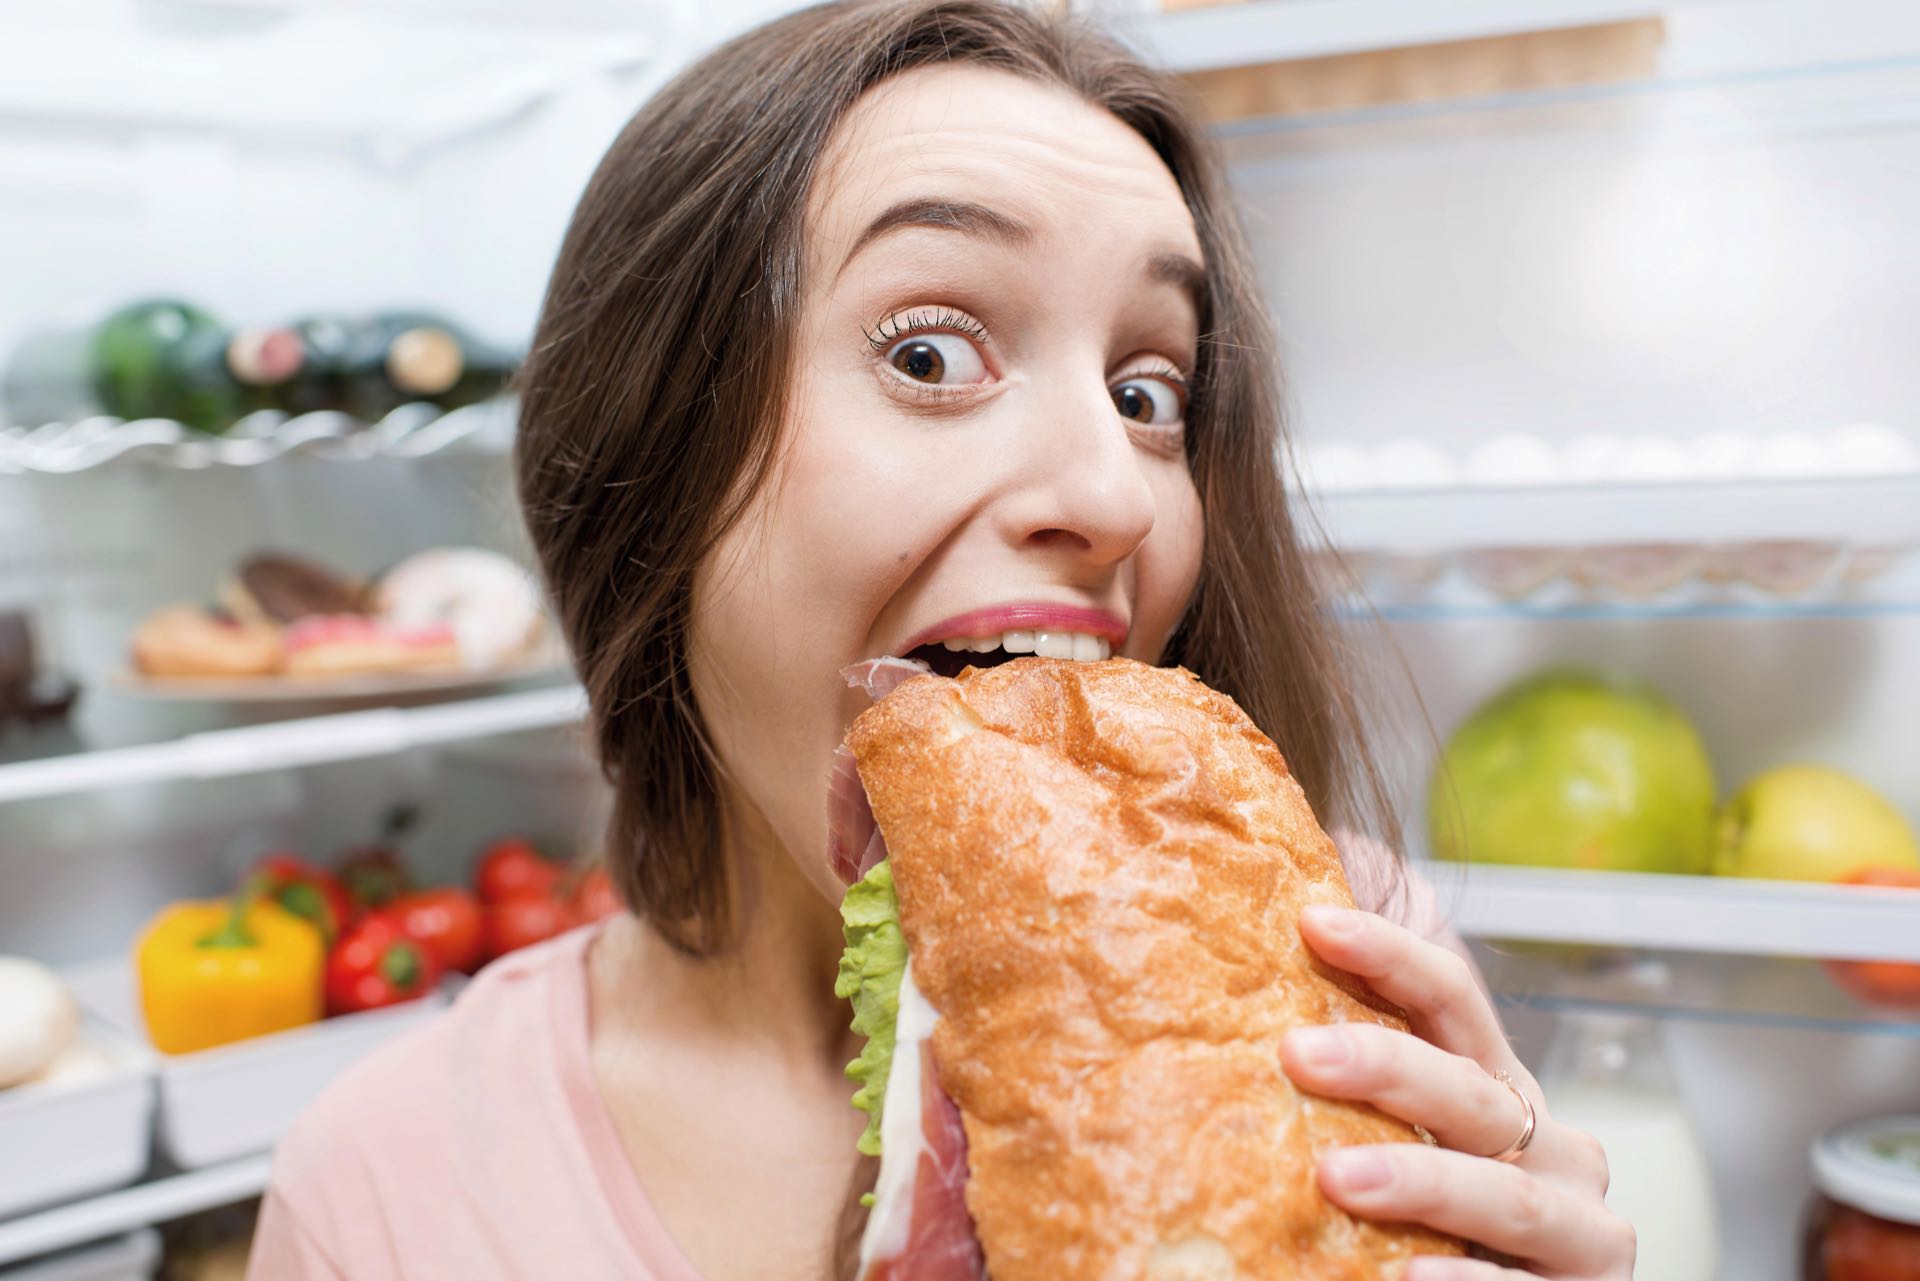 Young woman eating big sandwich in front of the refrigerator full of friuts and vegetables